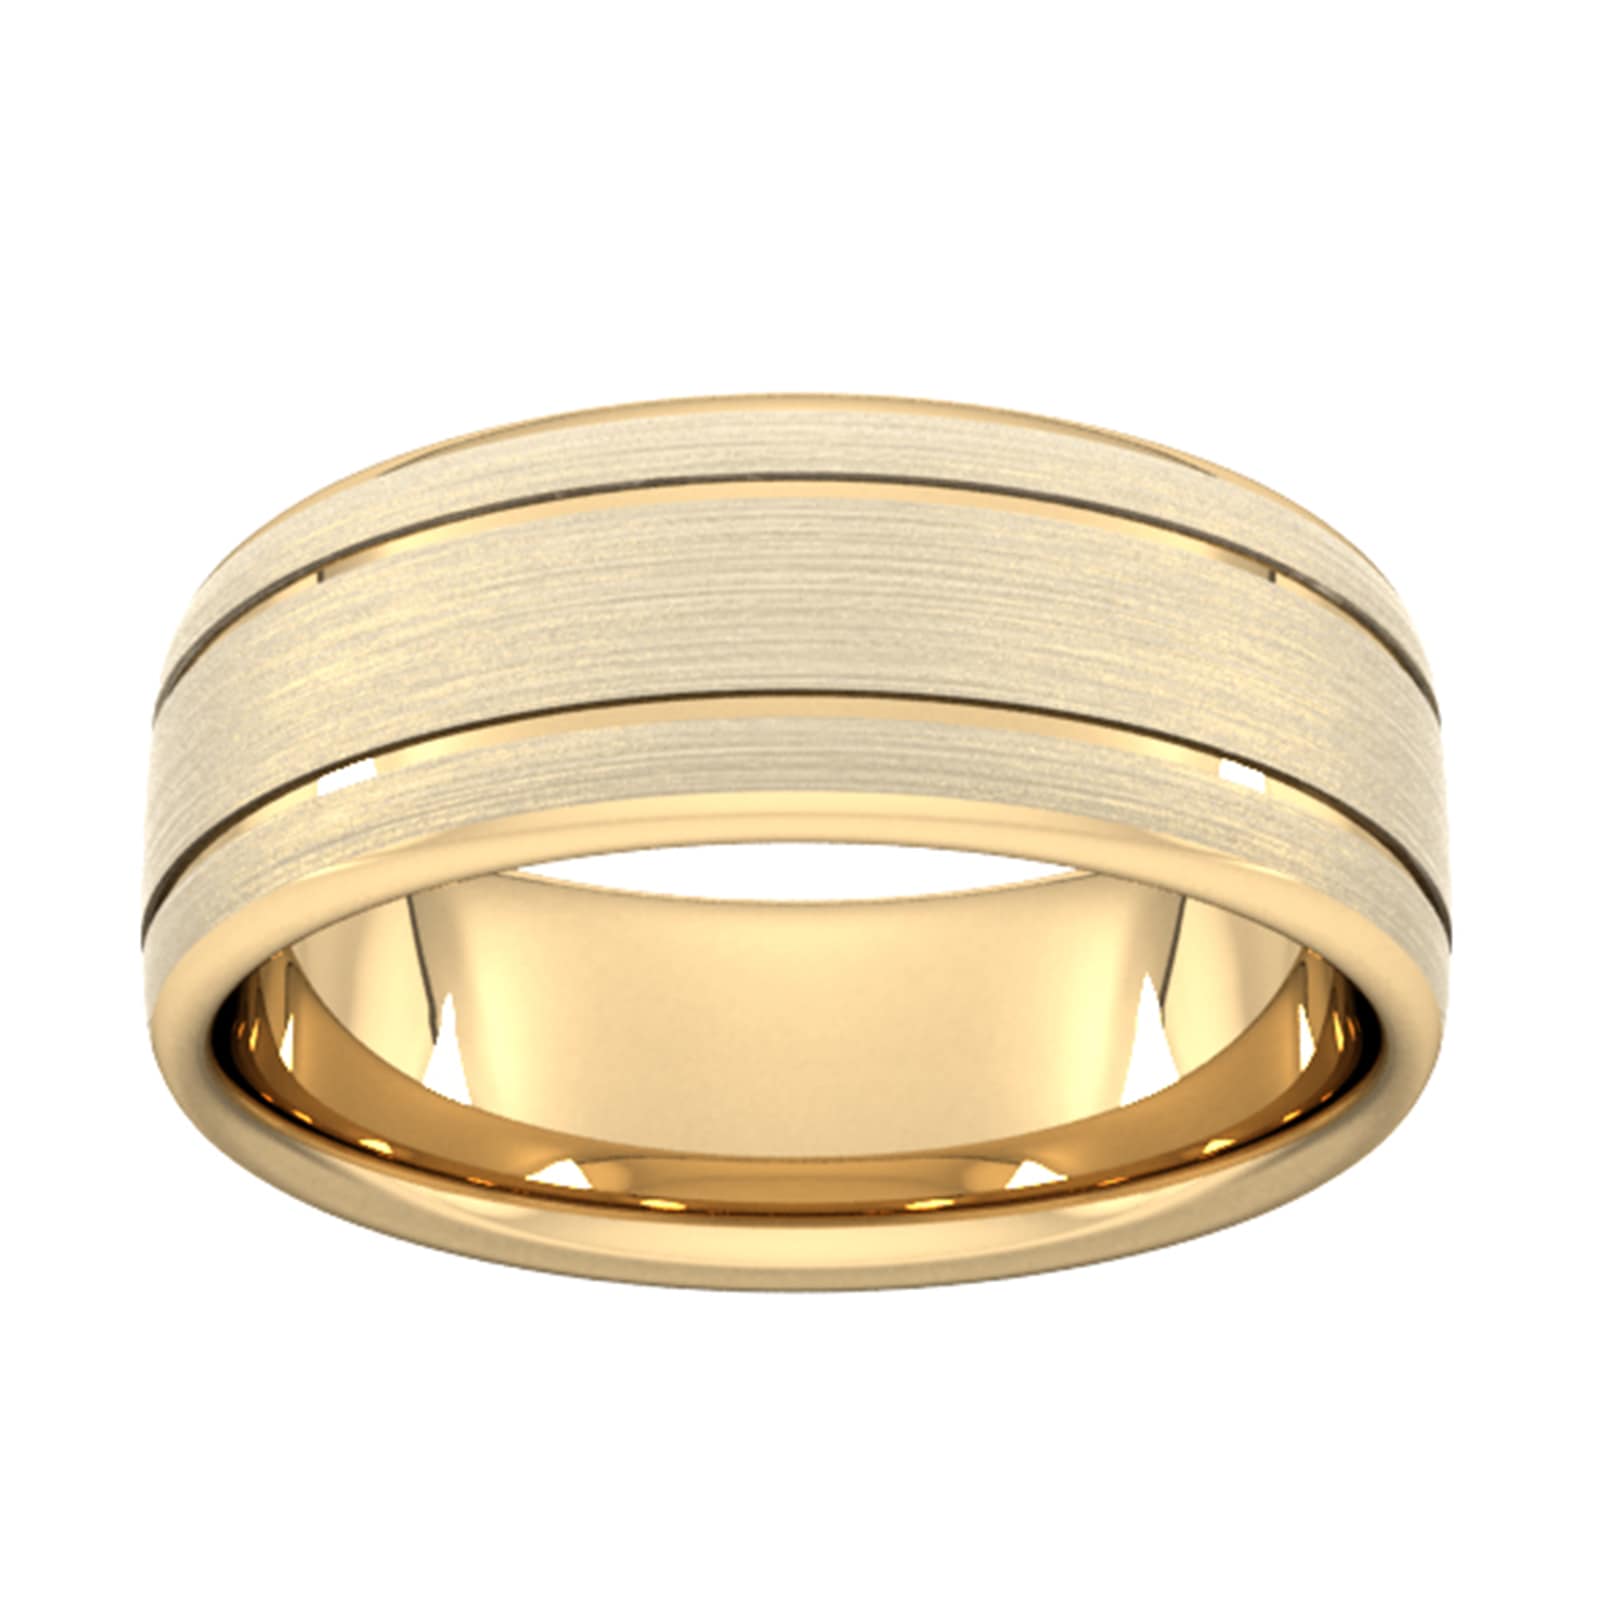 8mm Traditional Court Heavy Matt Finish With Double Grooves Wedding Ring In 9 Carat Yellow Gold - Ring Size Z